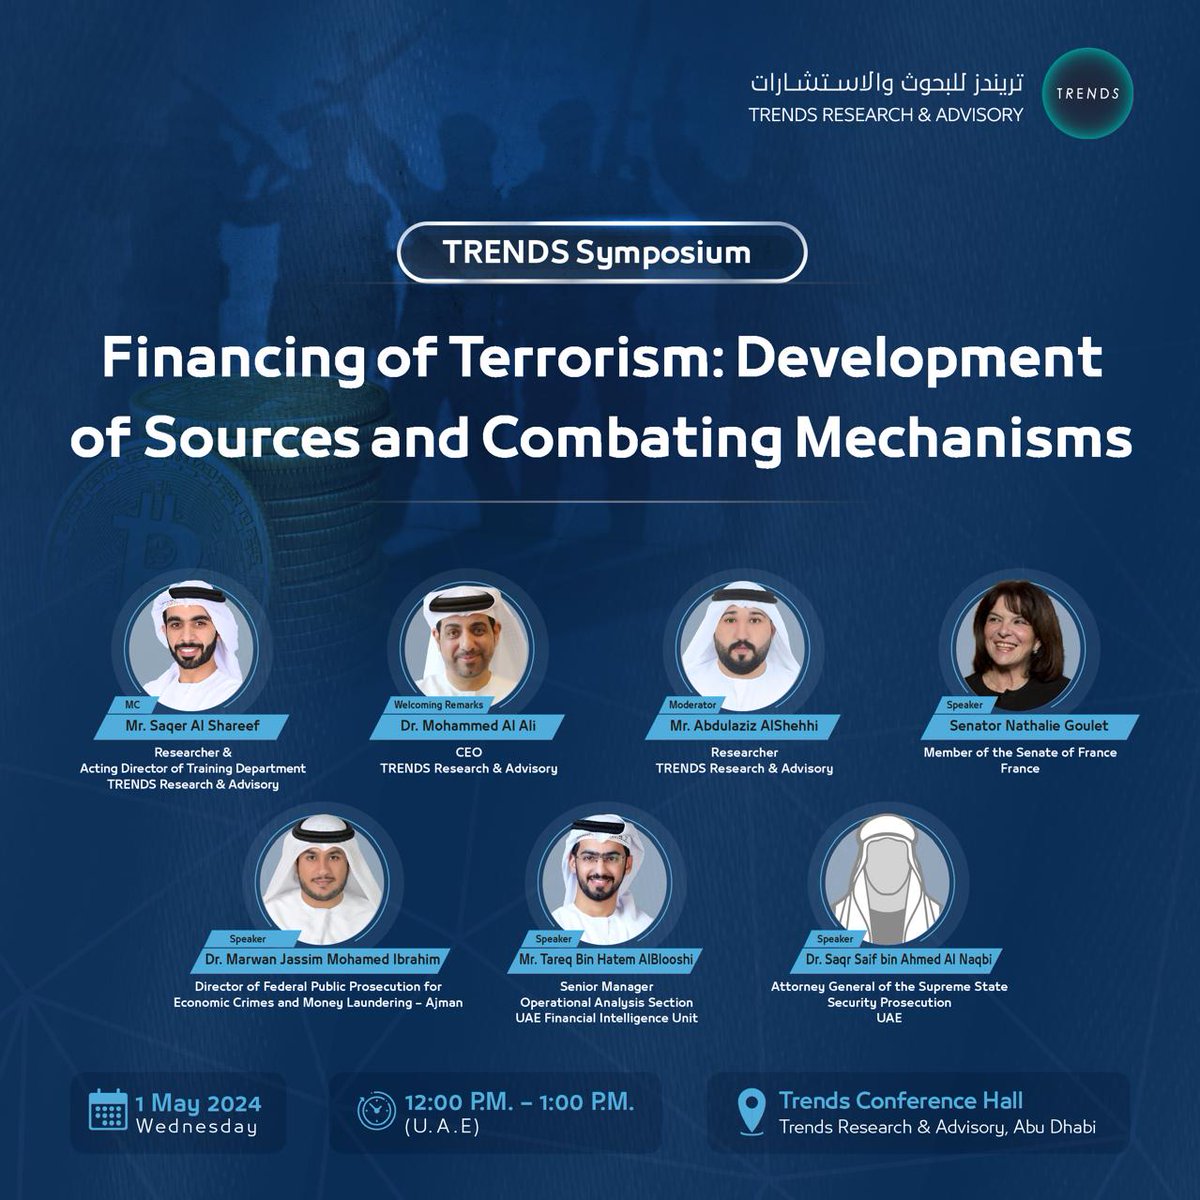 TRENDS, as part of its wide ranging scientific and intellectual endeavors at #AbuDhabiBookFair, is set to host a symposium titled 'Financing of Terrorism: Development of Sources and Combating Mechanisms'. #TRENDS #Symposium #CombatingTerrorism #Research #Knowledge @adibf